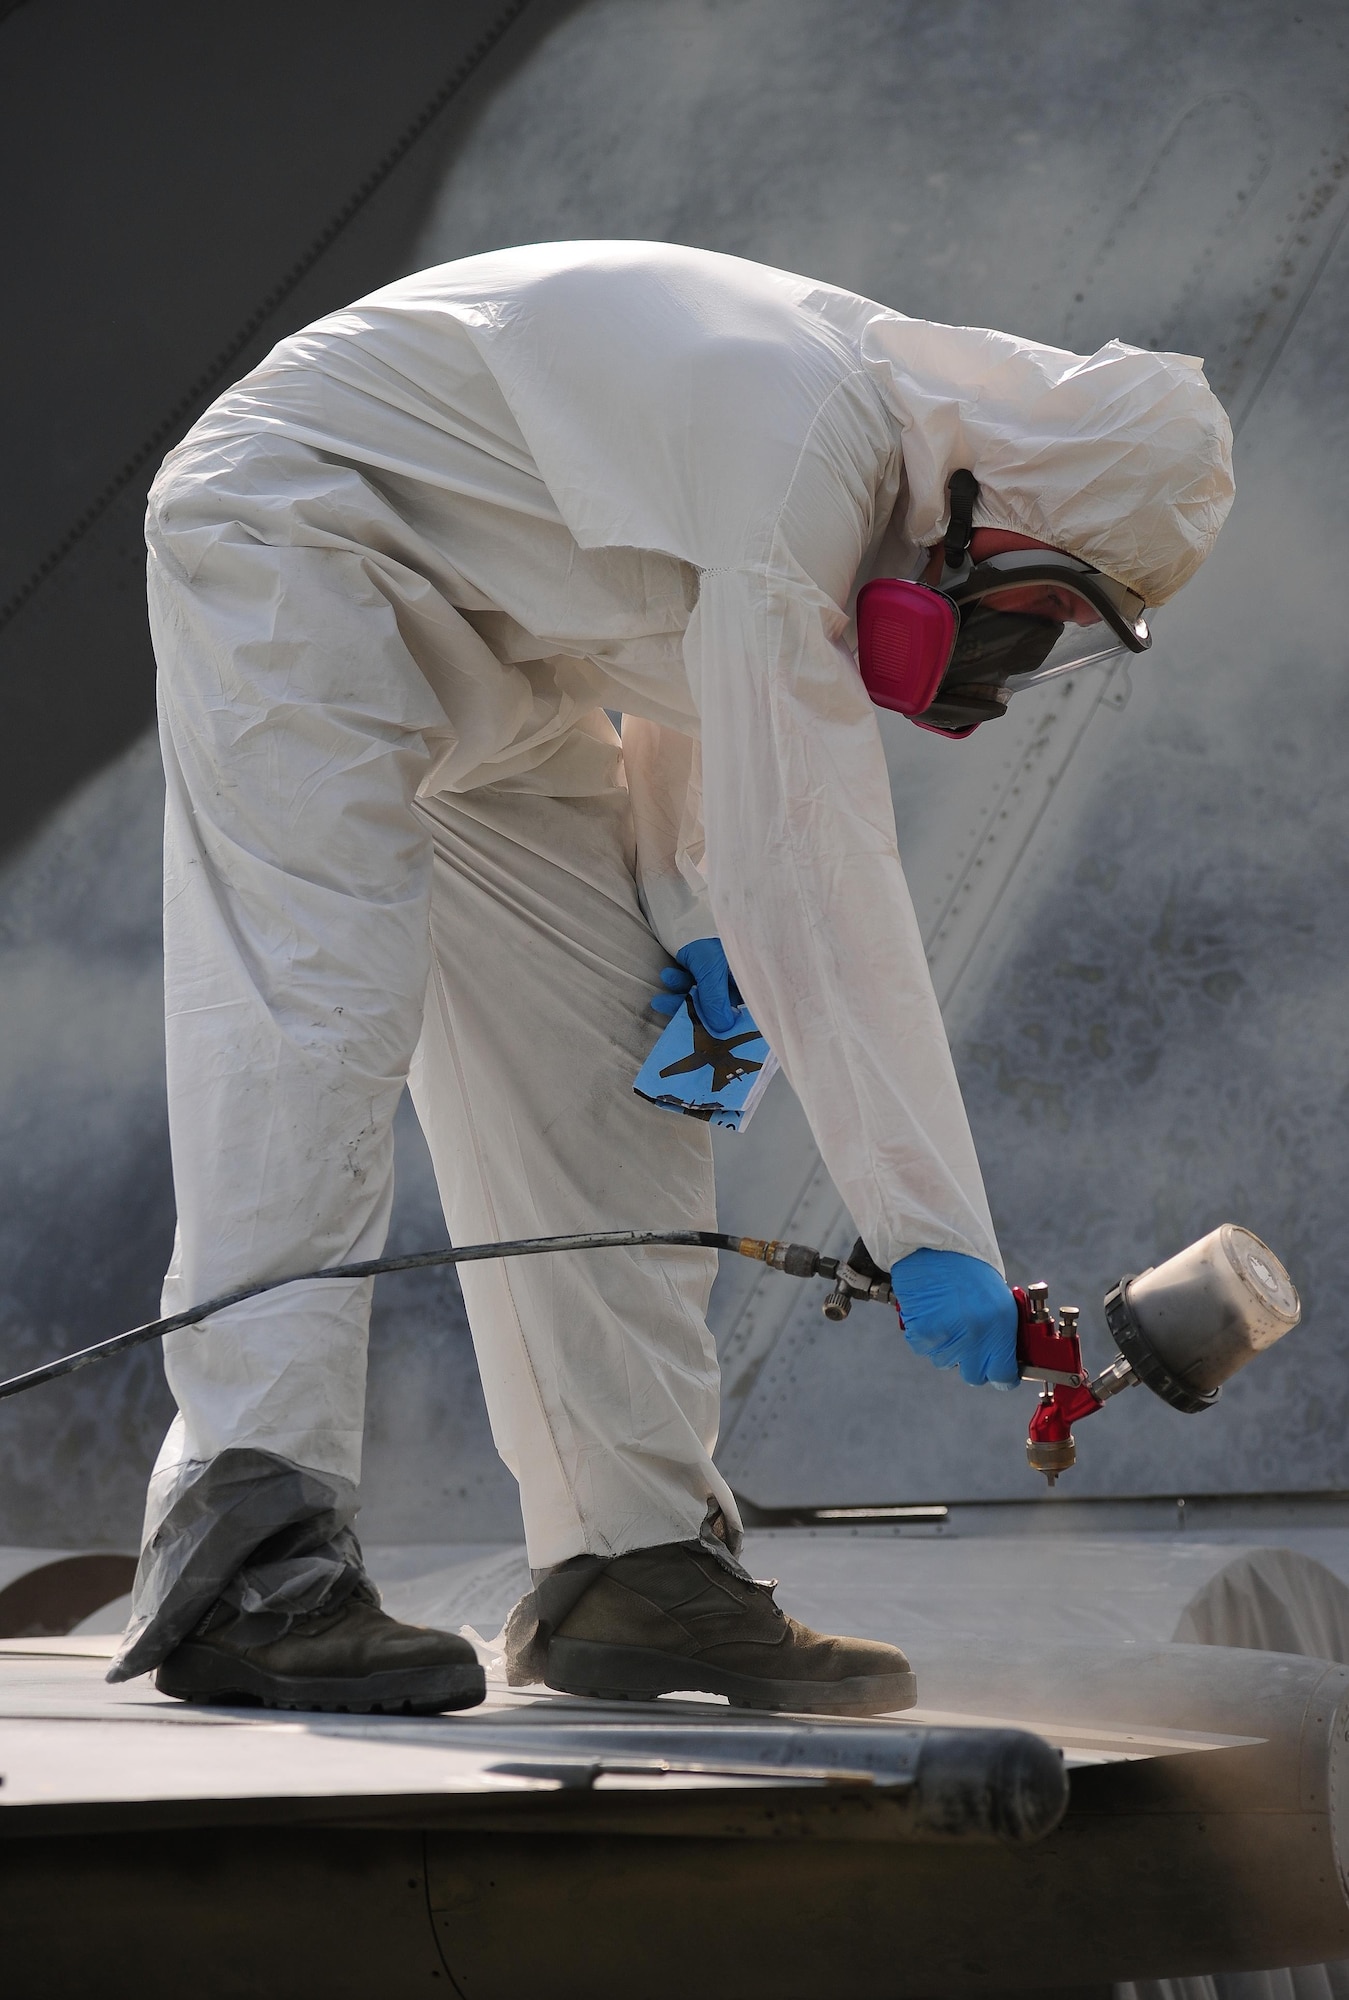 A low observable technician from the 509th Maintenance Squadron, spray a coating of paint onto an FB-111A General Dynamics Aardvark static display at Whiteman Air Force Base, Mo., Sept. 13, 2016. During the restoration process, the aircraft was sanded, primed, repainted and received corrosion maintenance. (U.S. Air Force photo by Senior Airman Joel Pfiester)